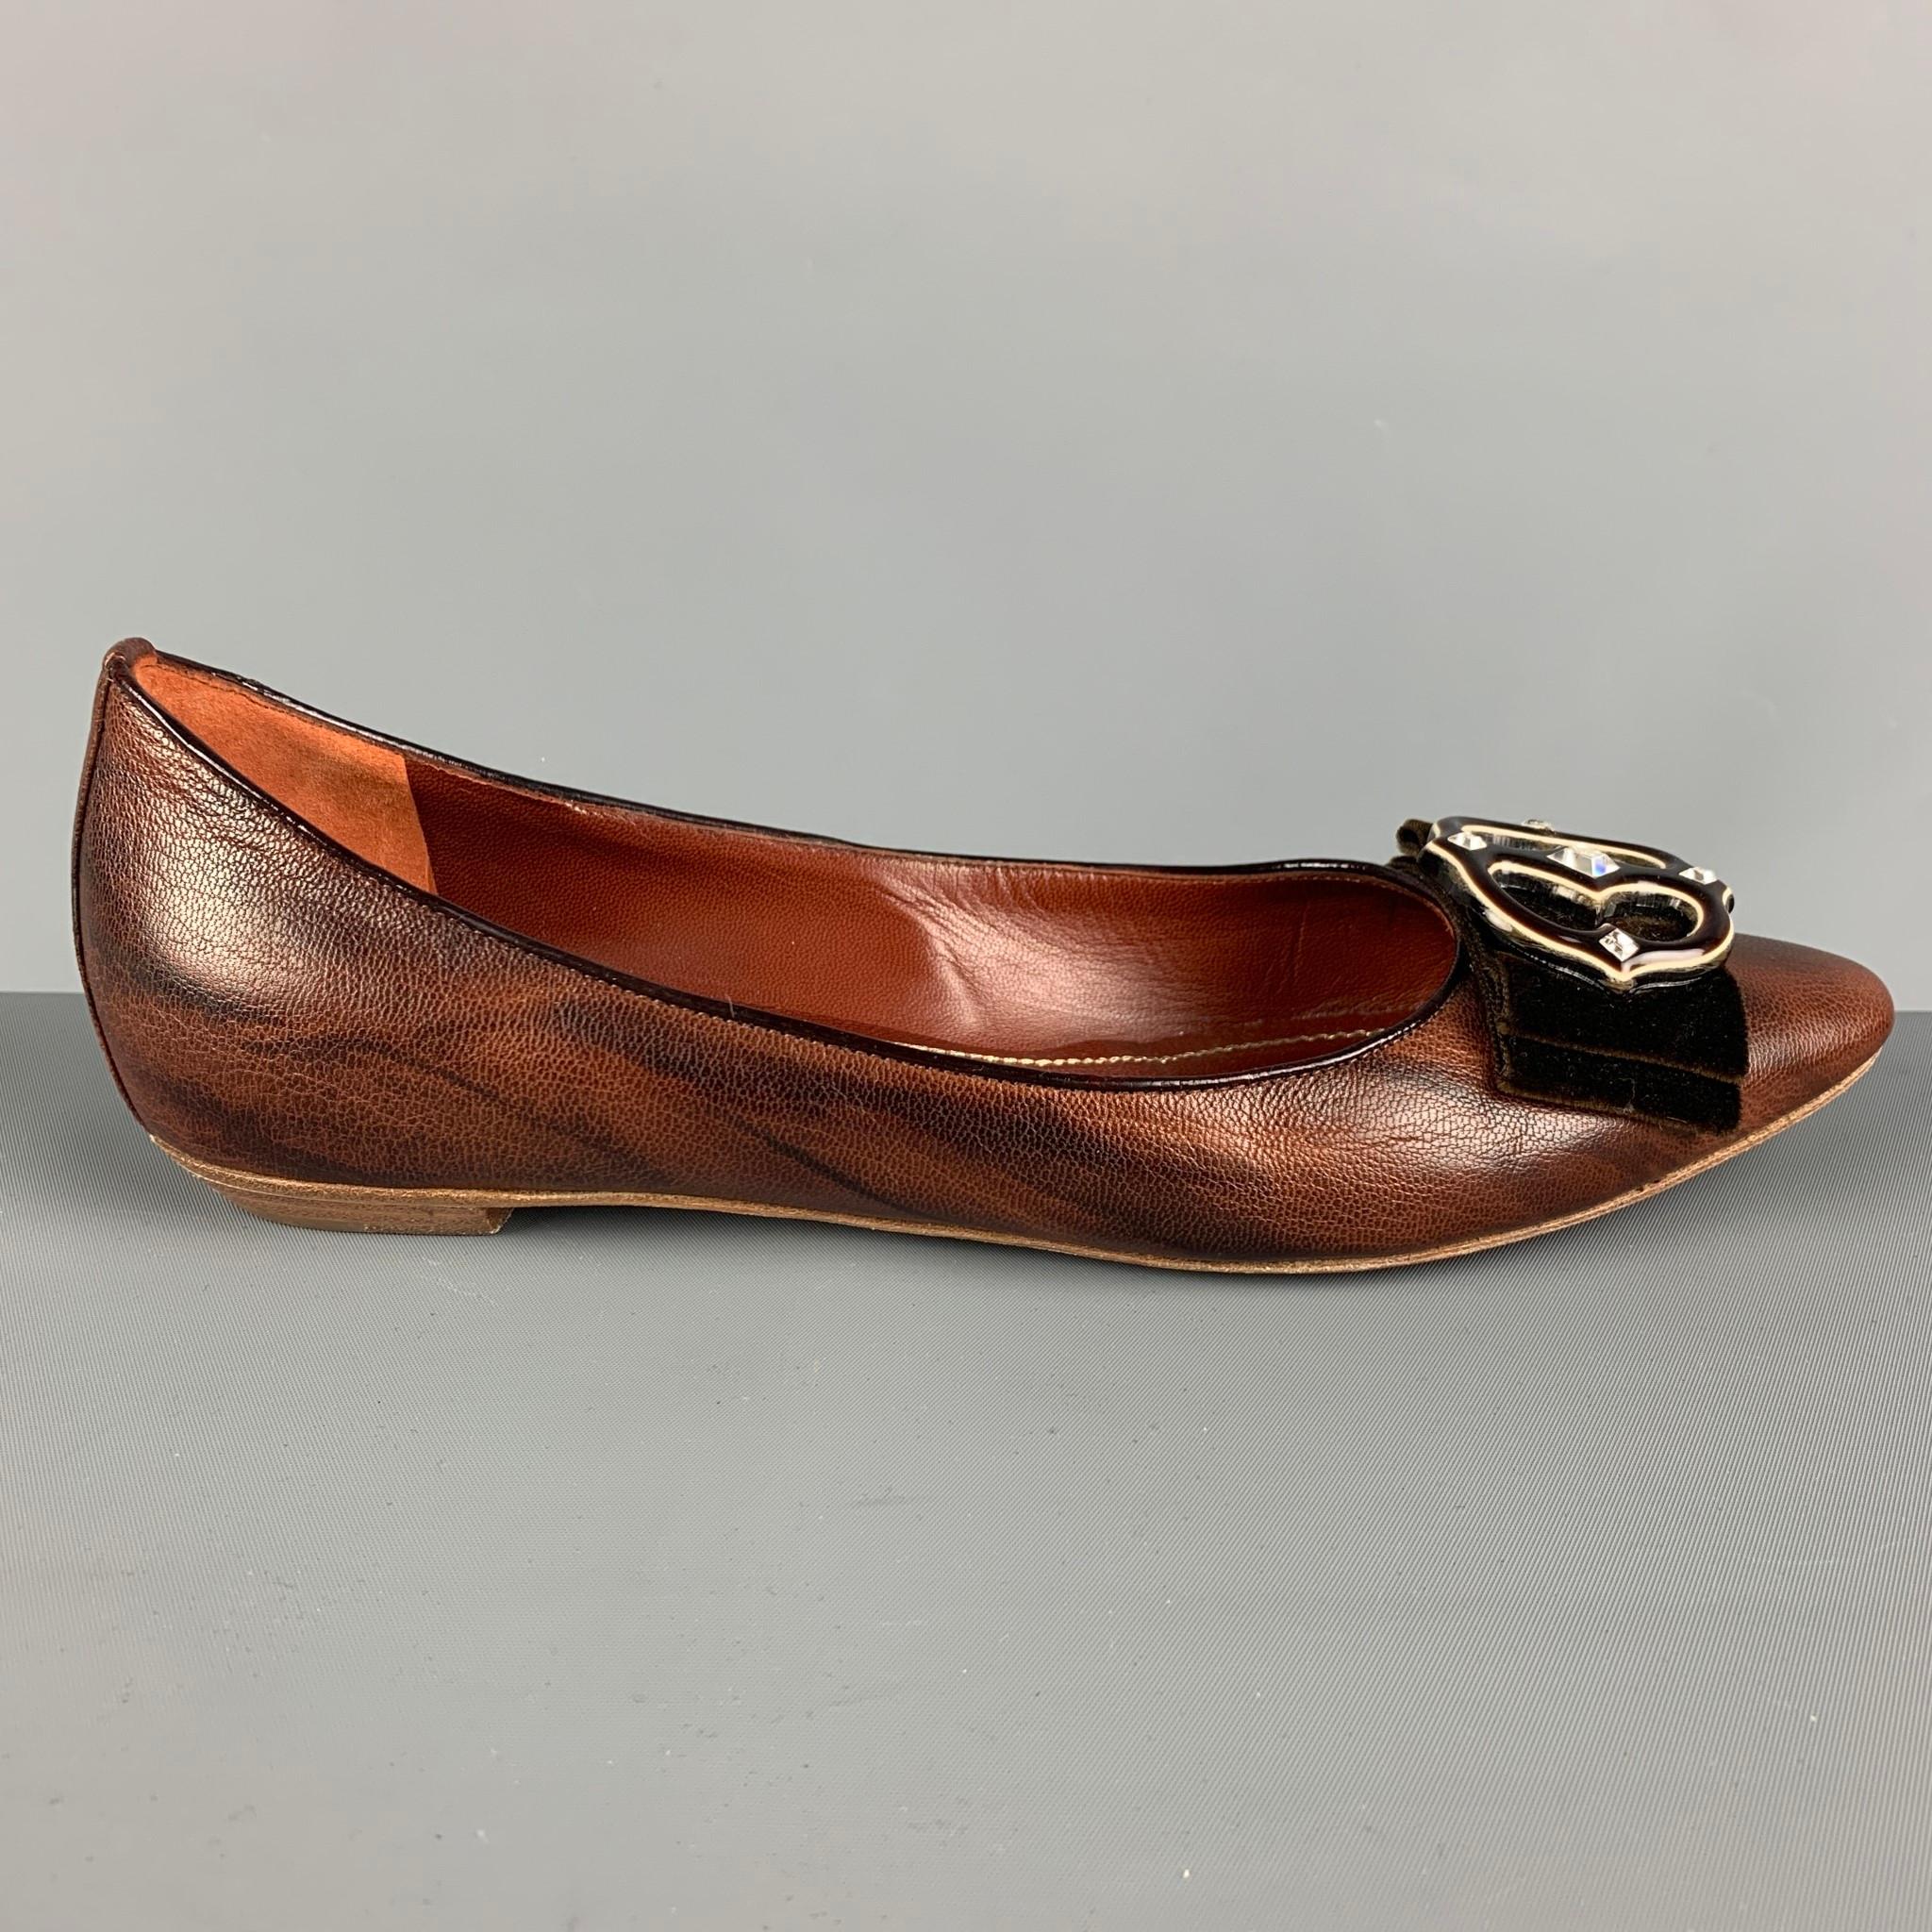 RENE CAOVILLA flats comes in a brown material featuring a ballet style, brown velvet bow, and a rhinestones embellished design. Made in Italy.

Very Good Pre-Owned Condition.
Marked: 38 1/2 M

Outsole: 10 in. x 3.25 in.  

SKU: 117822
Category: